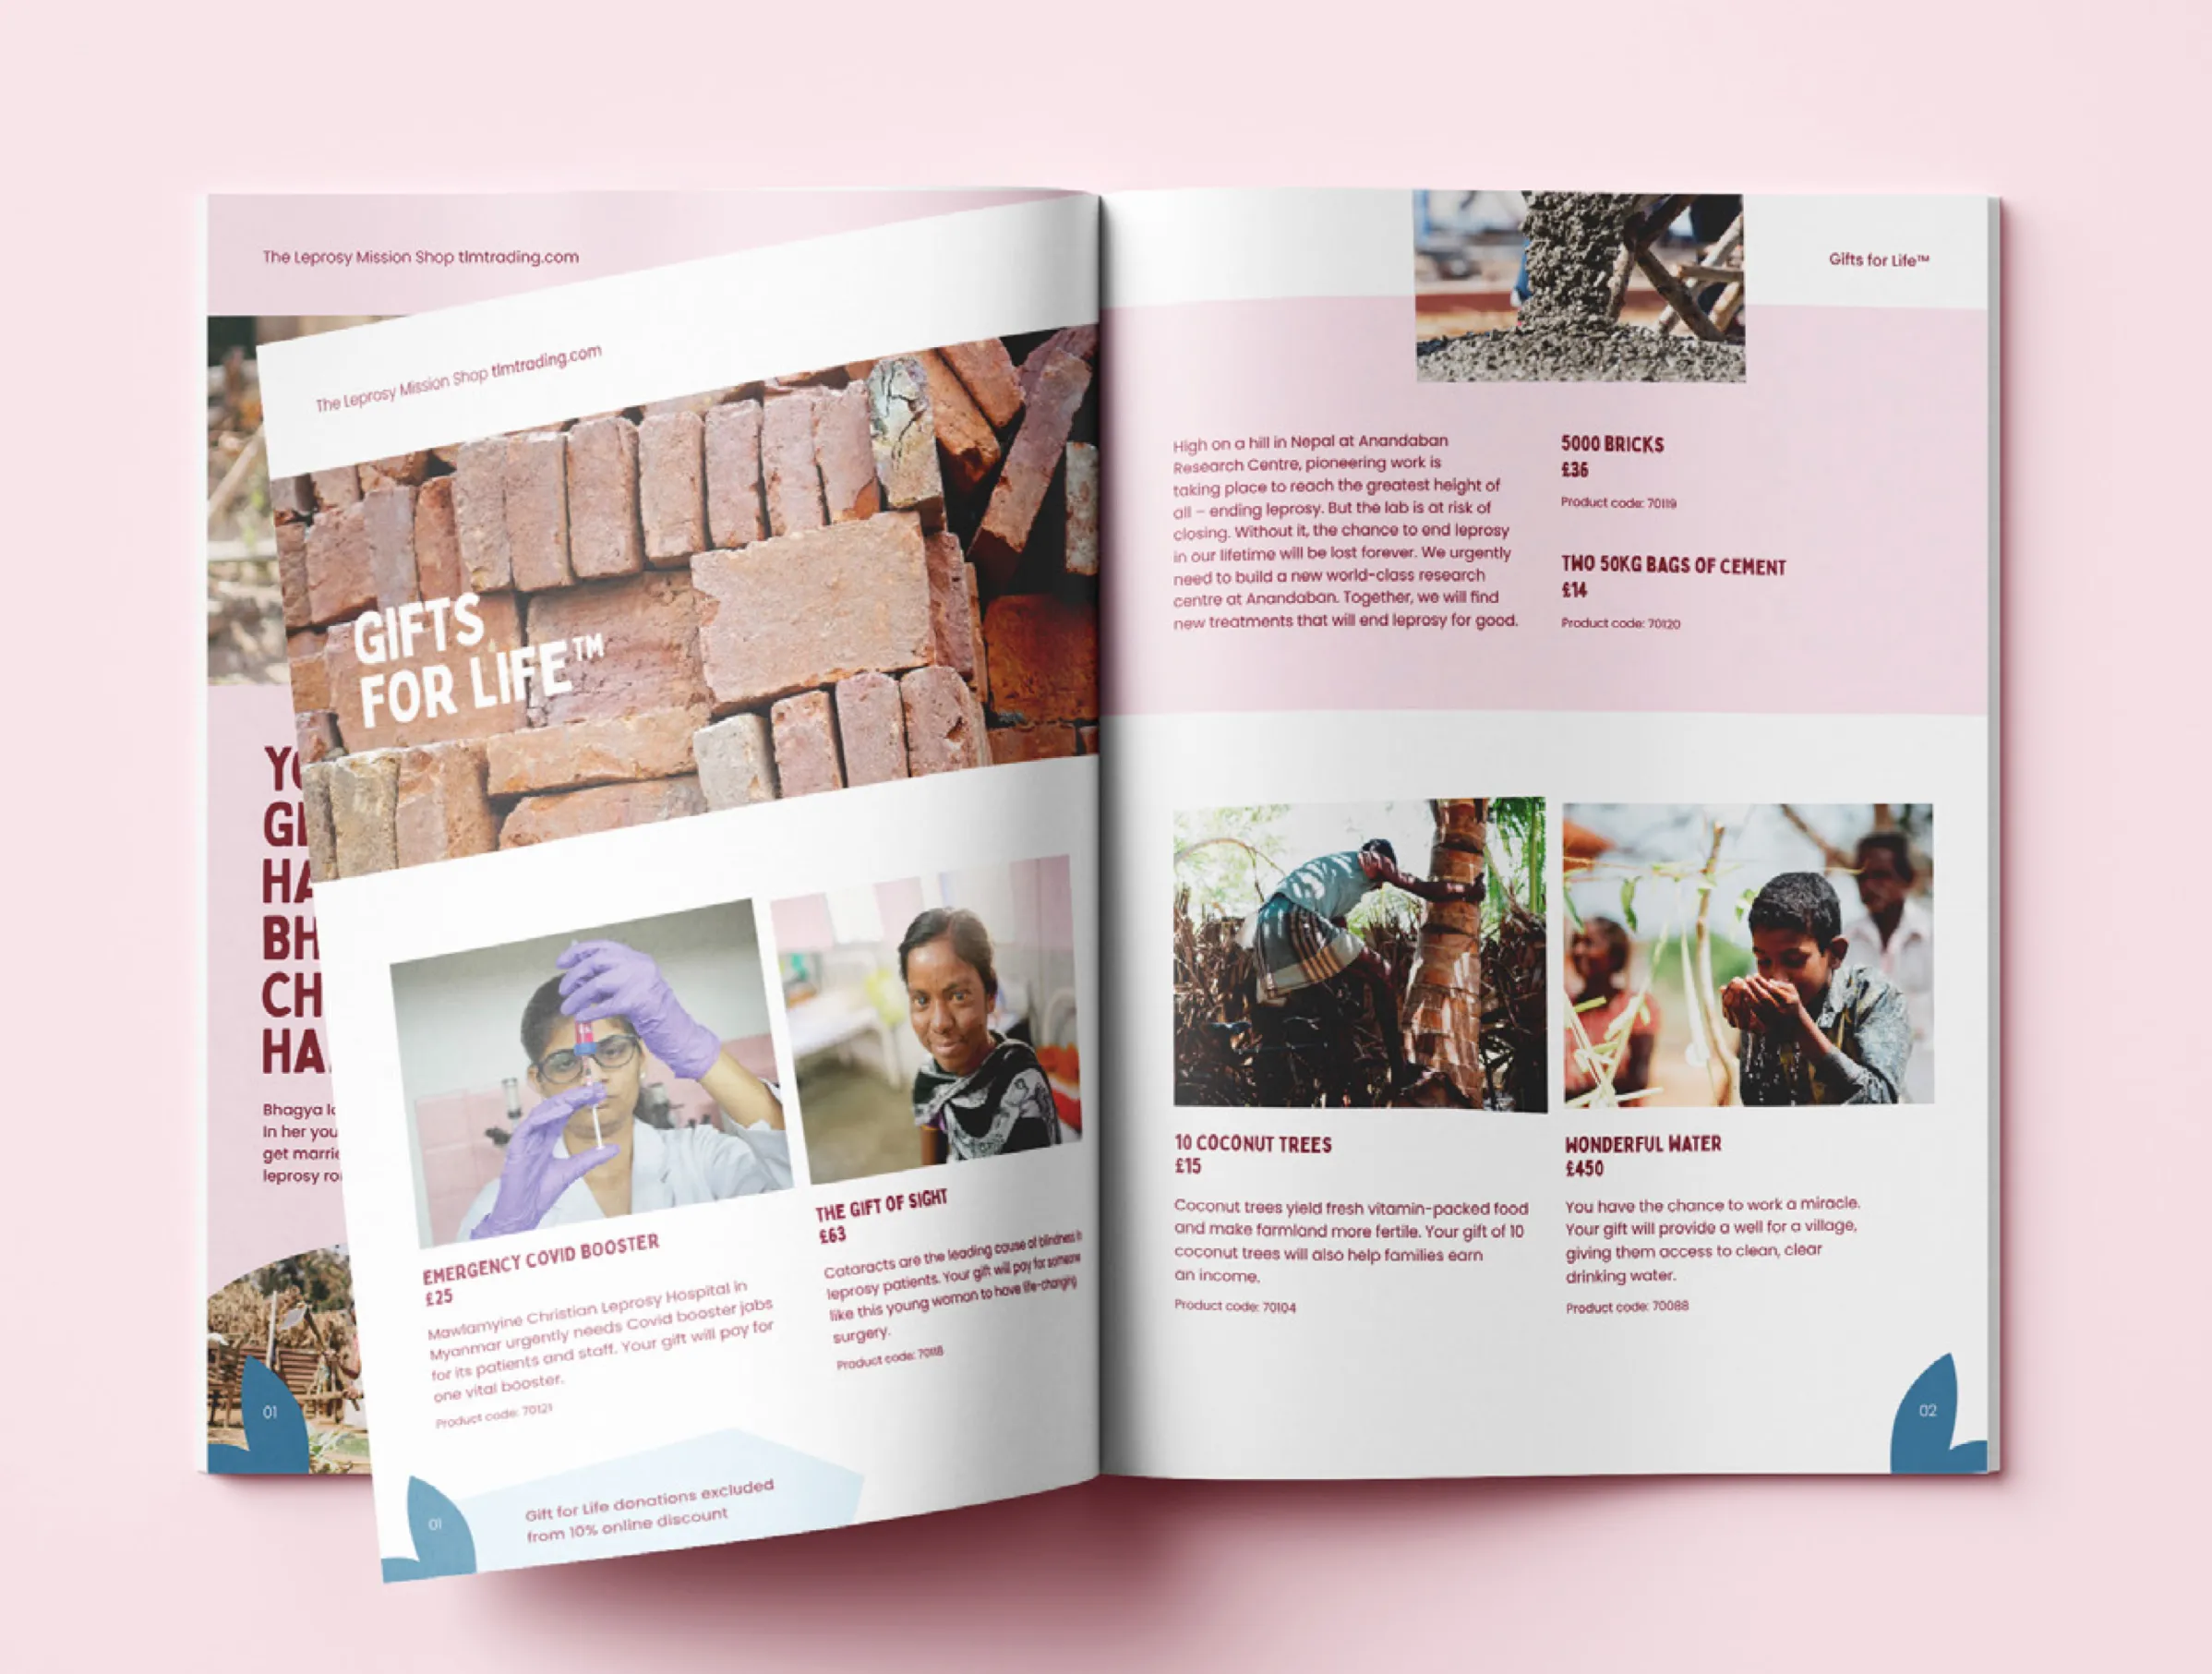 Pages from the Leprosy Mission Shop catalogue